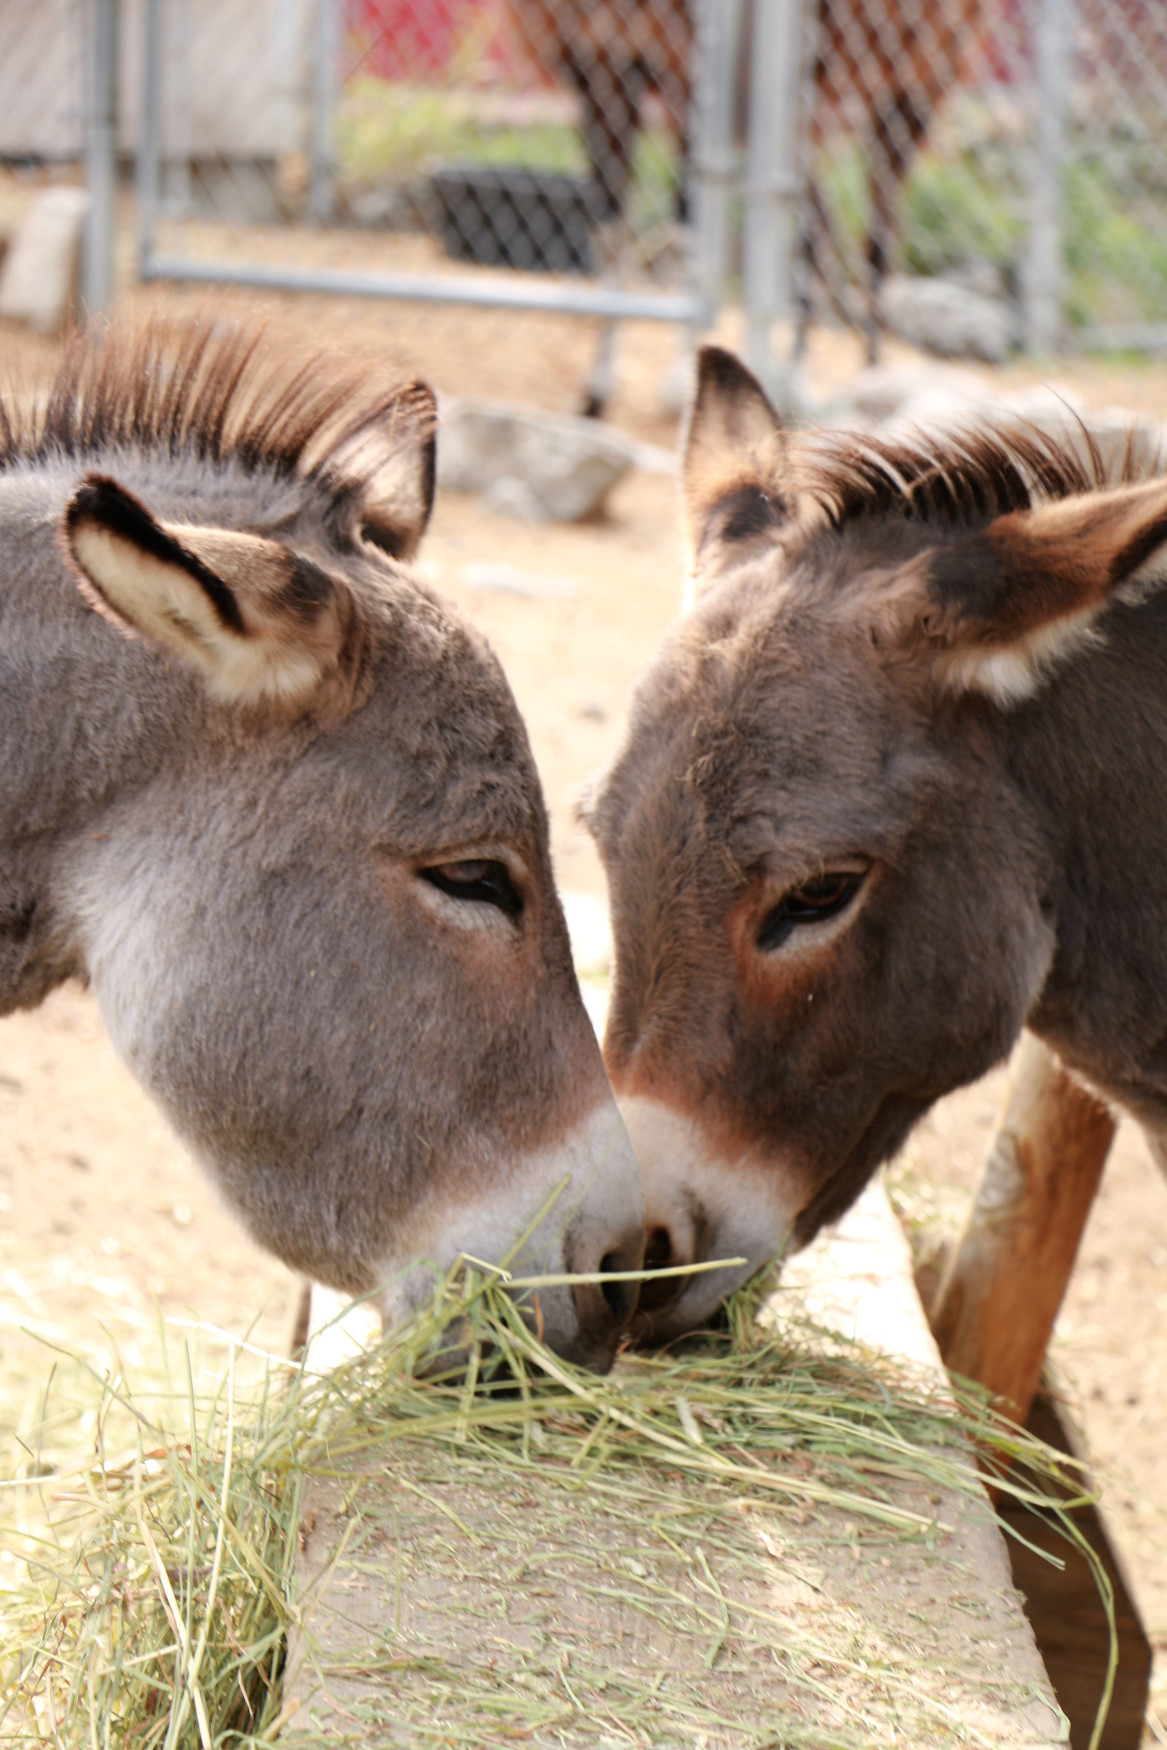 Feeding time for the miniature donkeys.